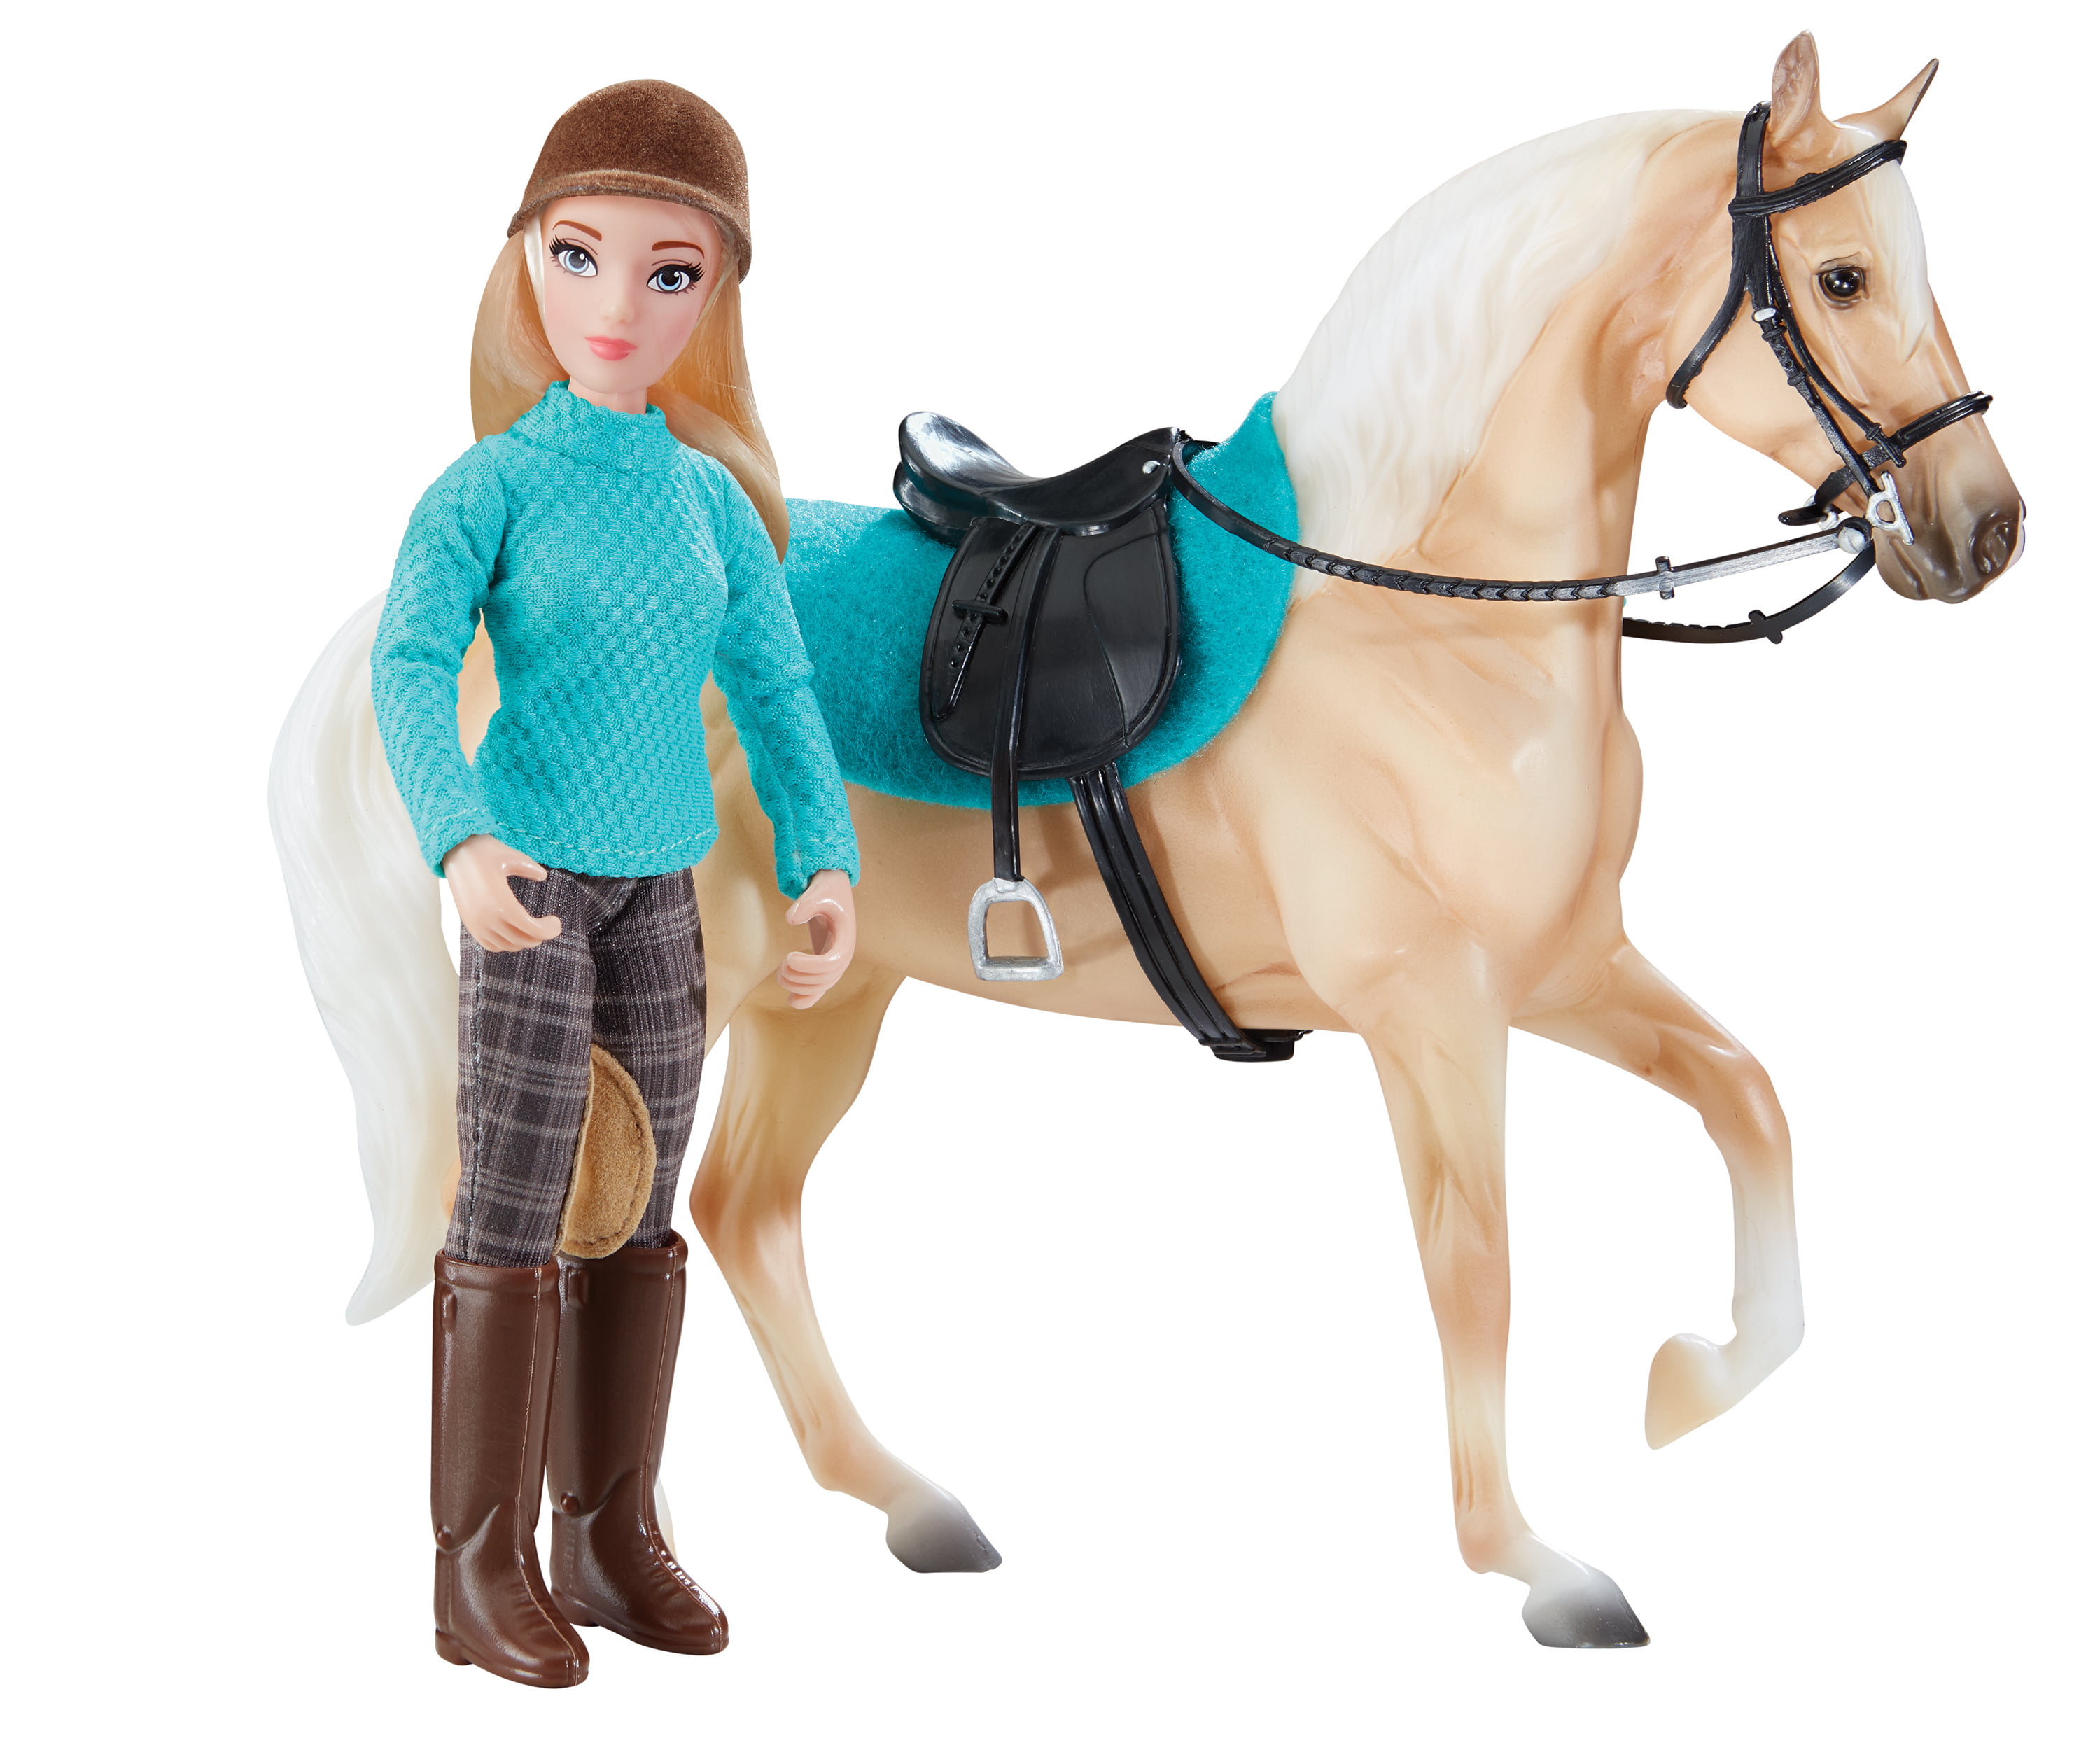 Details about   Breyer Freedom Series English Horse and Rider Doll Kids Toy Set and Accessories 